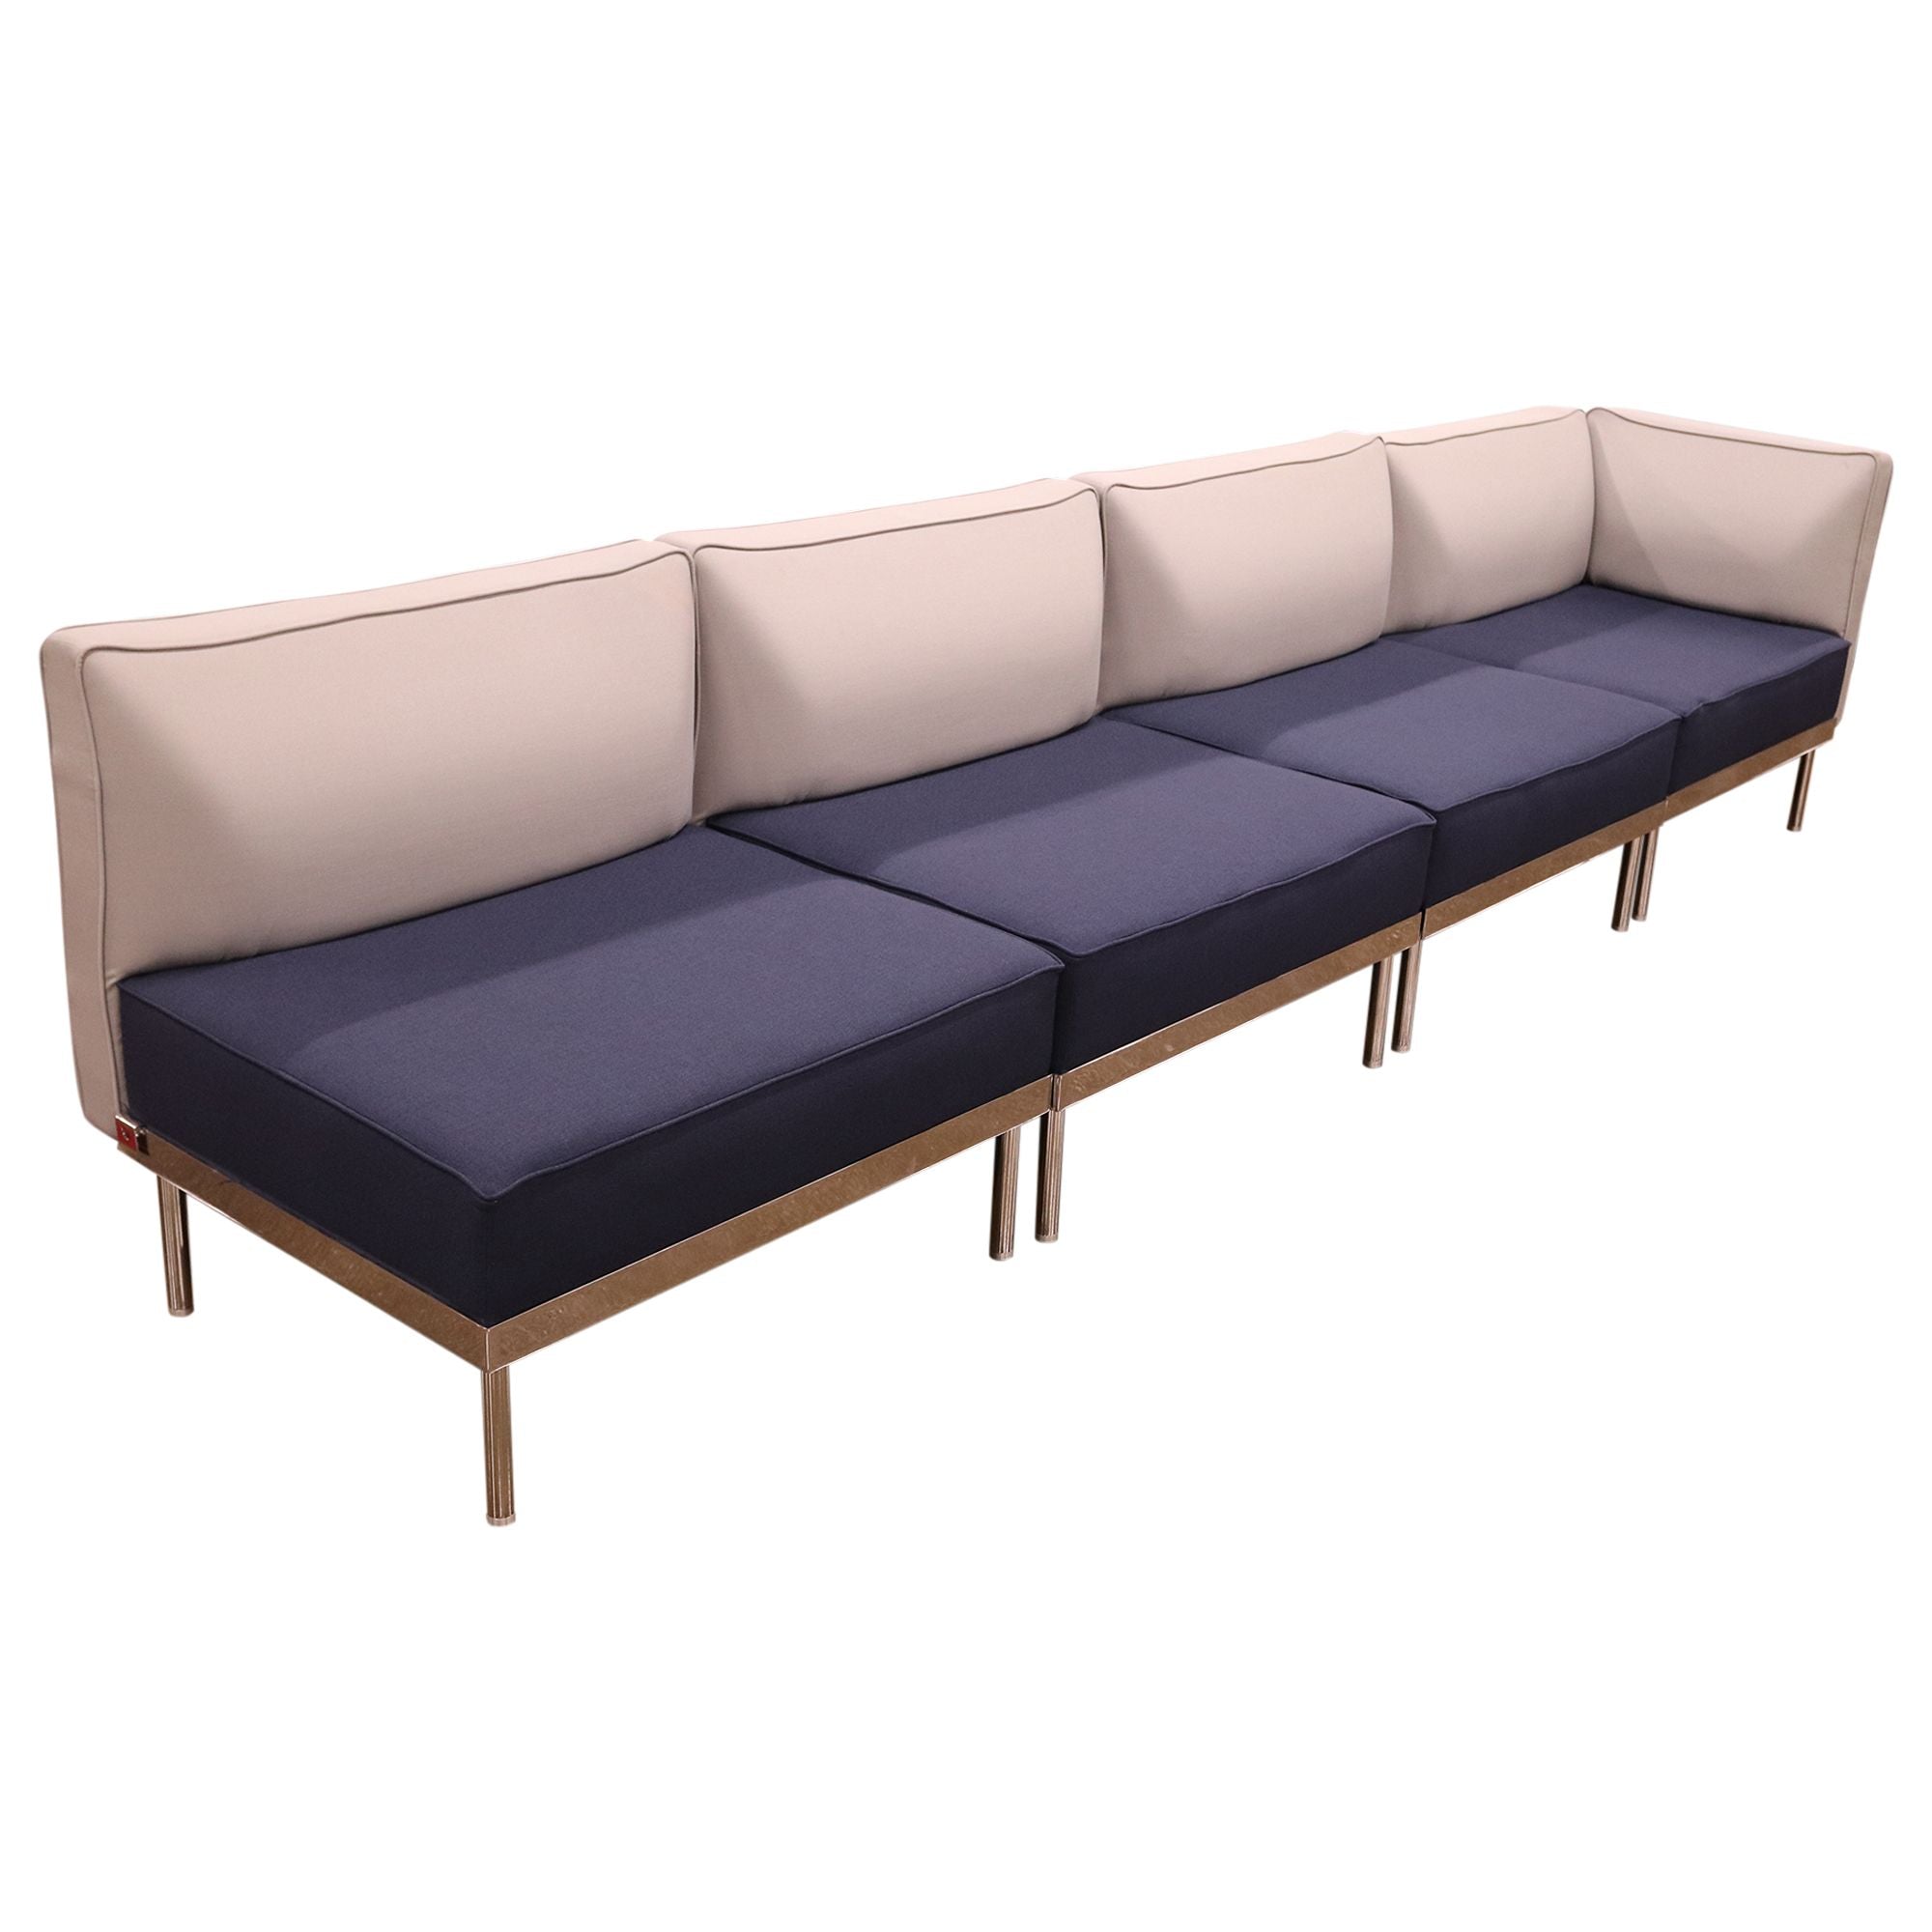 OFS Modular Corner Sectional, Grey and Blue - Preowned